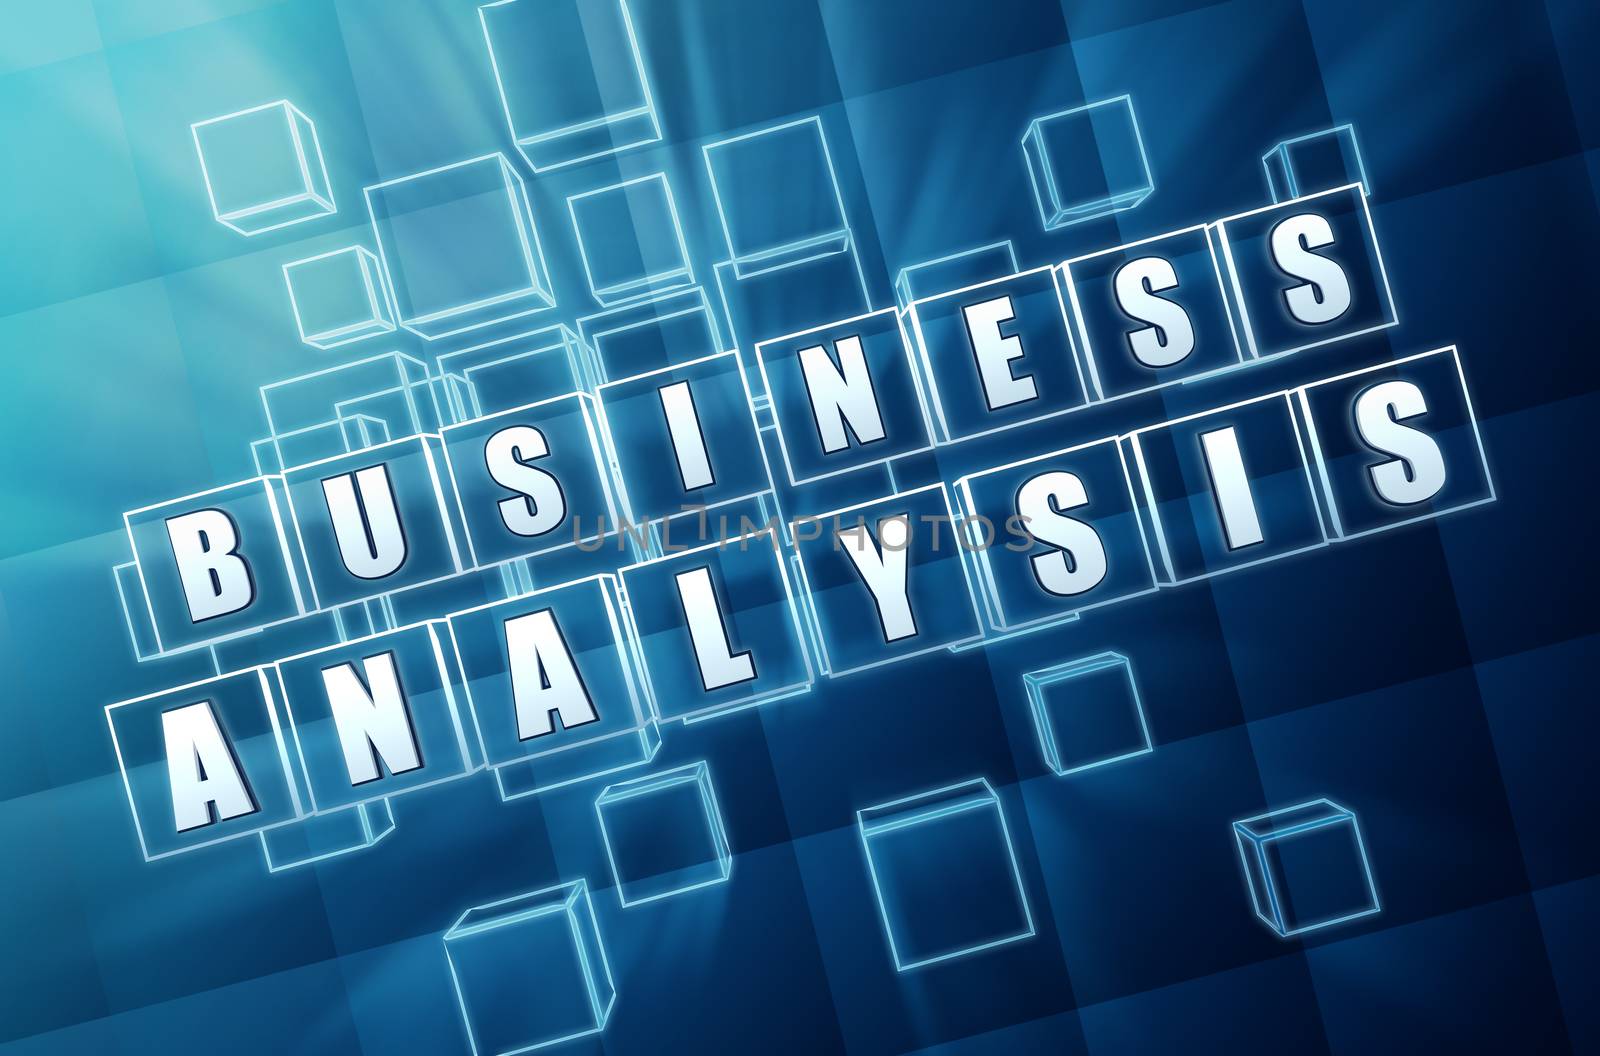 business analysis - text in 3d blue glass cubes with white letters, business marketing exploration conceptual words